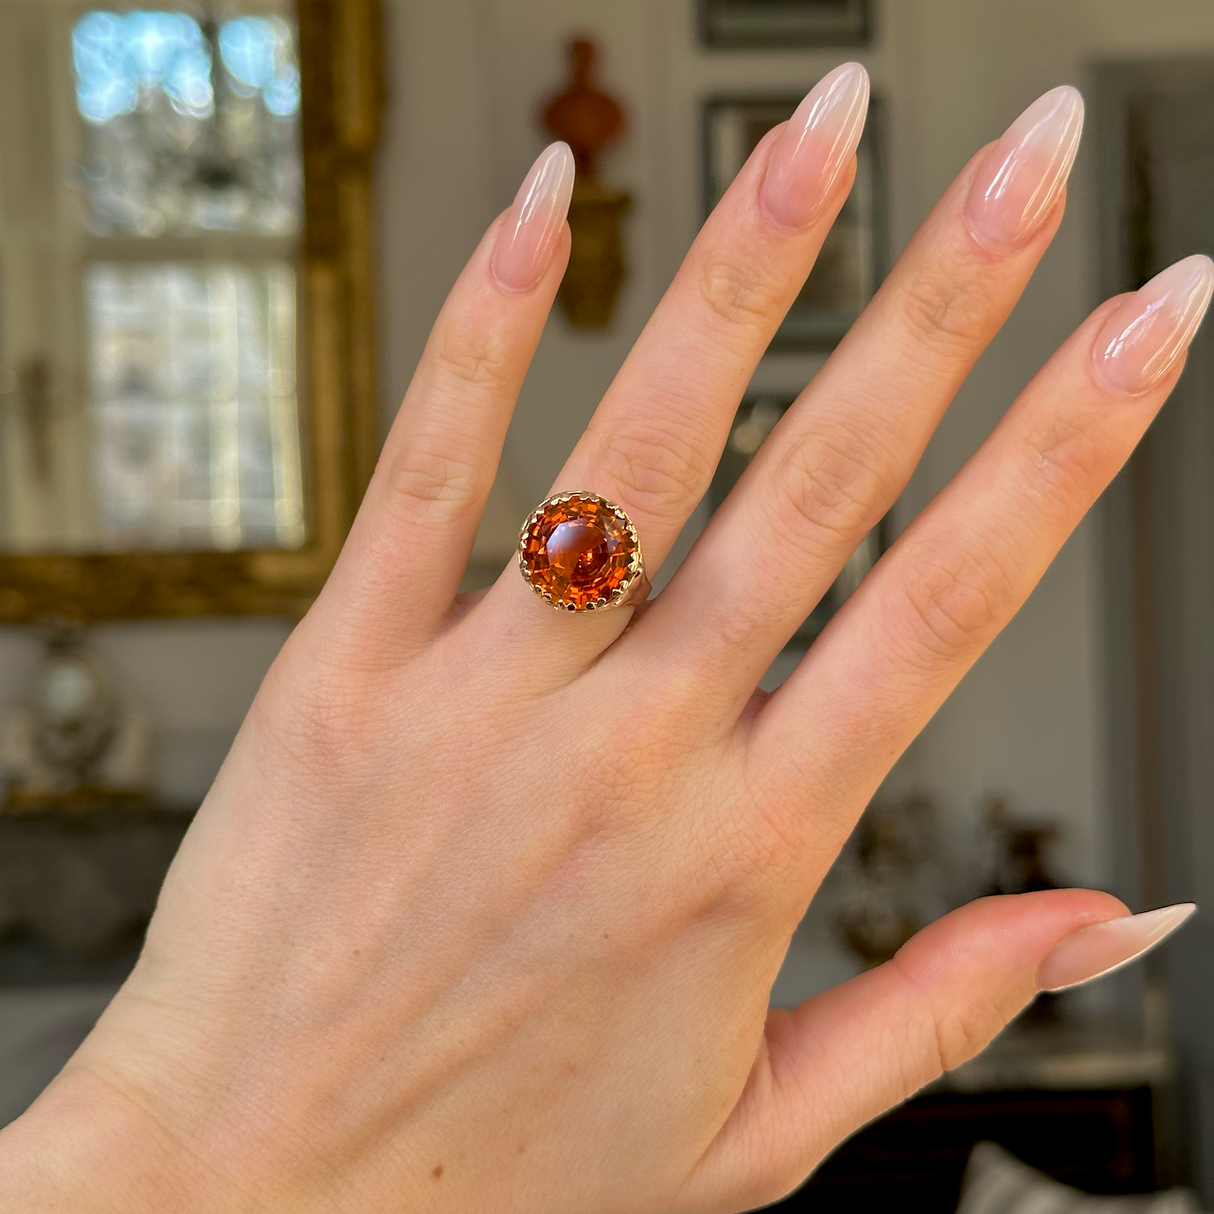 Vintage, 1980s Citrine Cocktail Ring, 18ct Yellow Gold worn on hand.